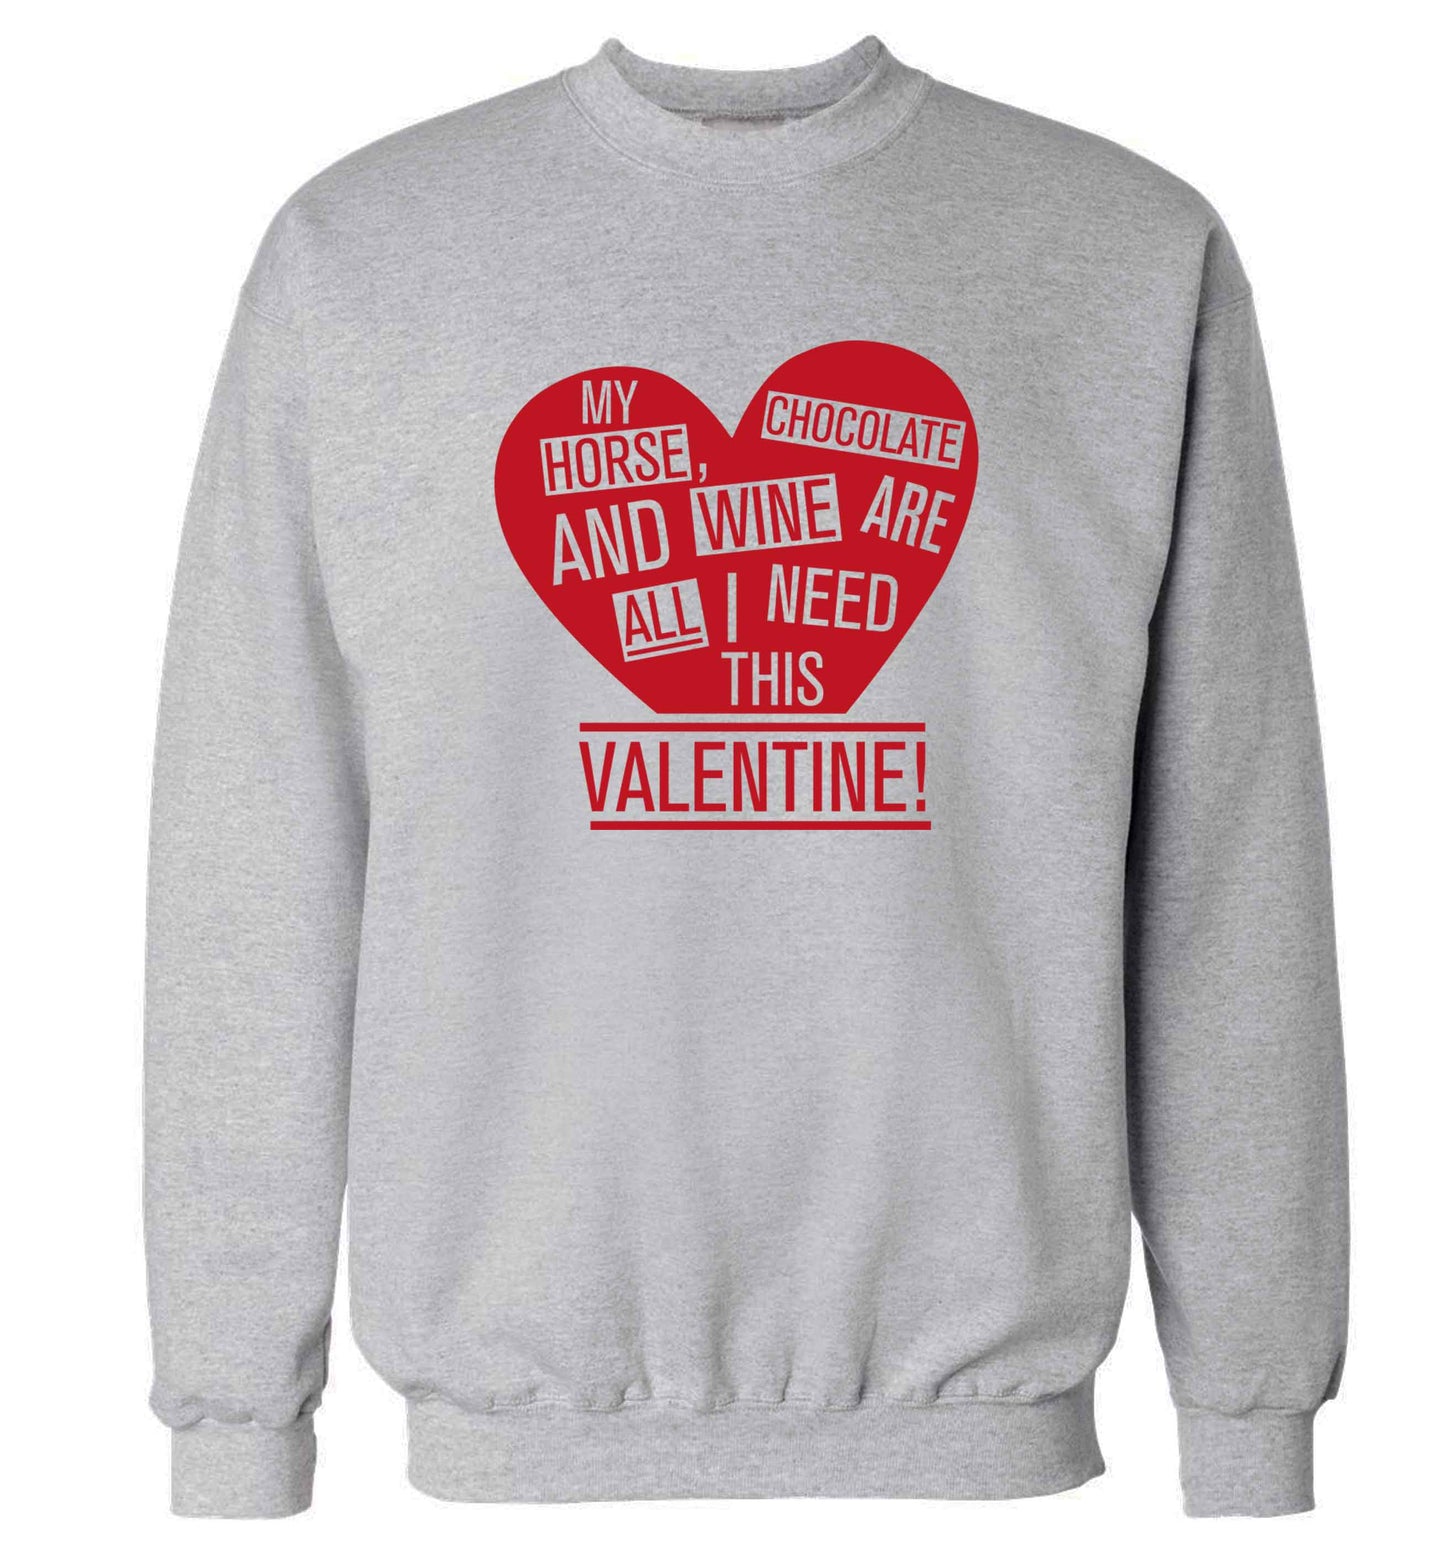 My horse chocolate and wine are all I need this valentine adult's unisex grey sweater 2XL